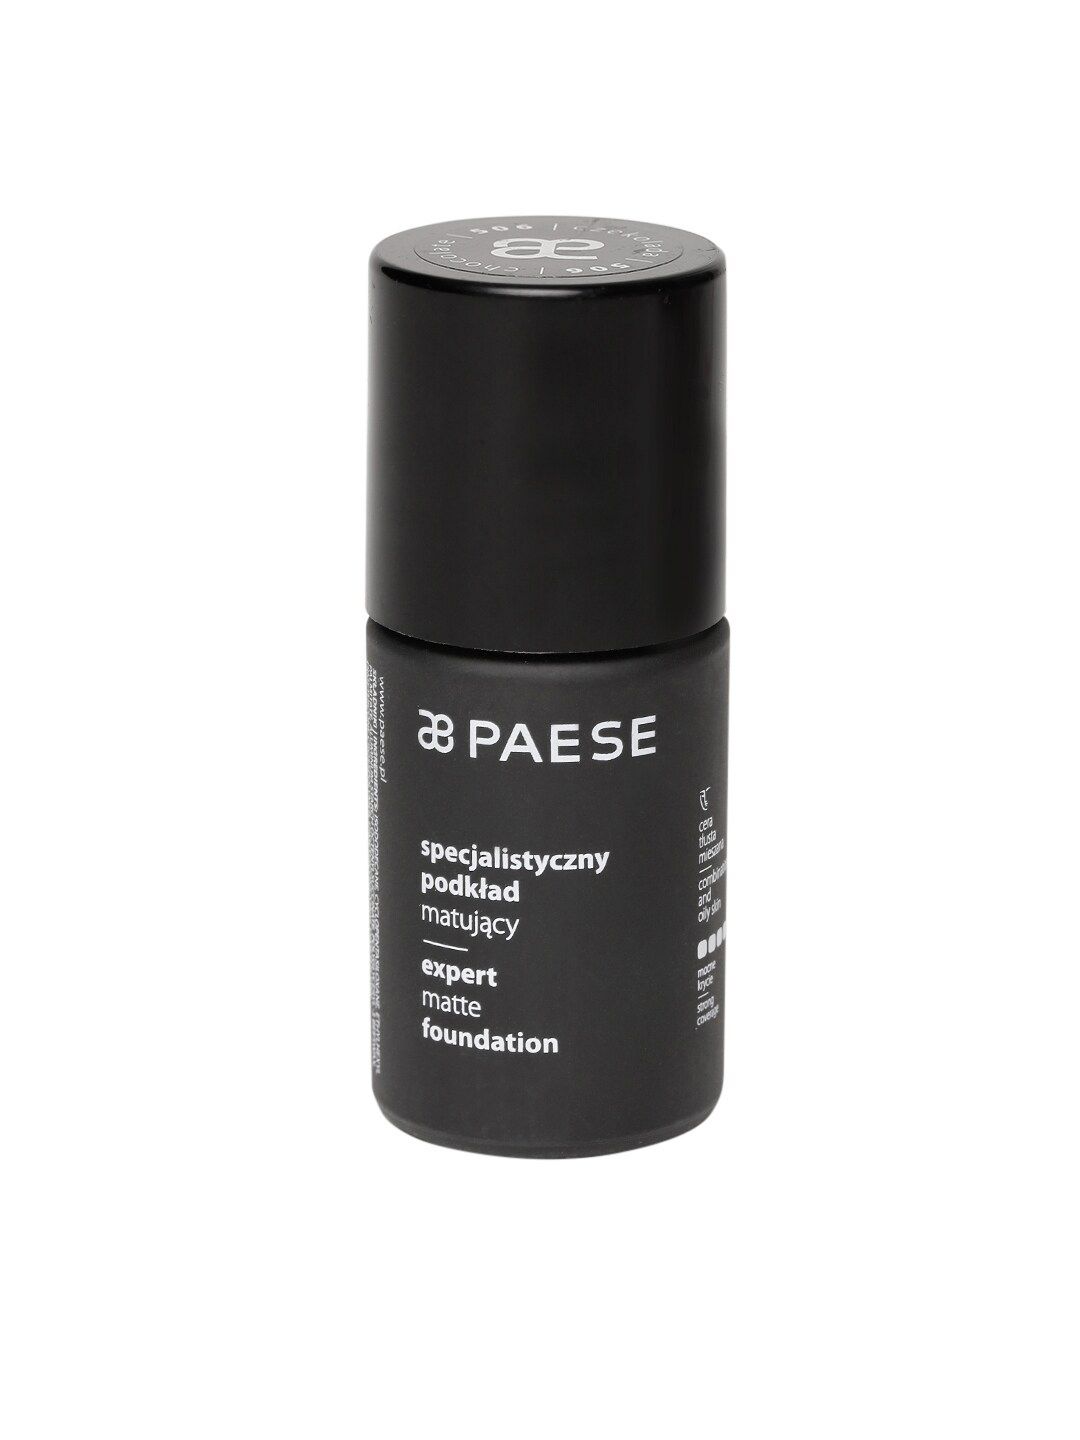 Paese Cosmetics Expert Matte Foundation 506 30 ml Price in India